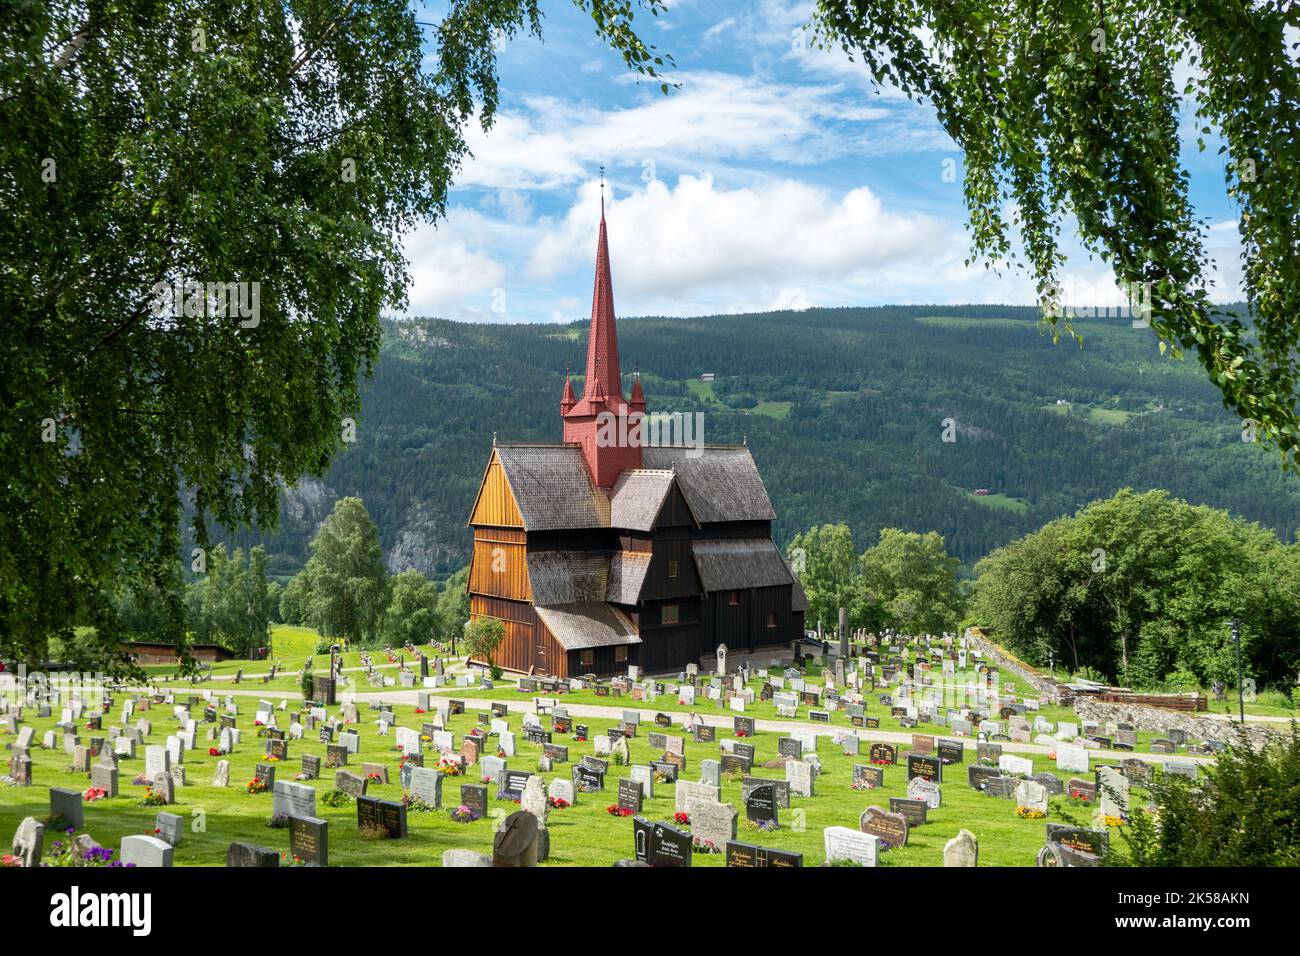 famous wooden Stave Church of Ringebu in Norway Stock Photo